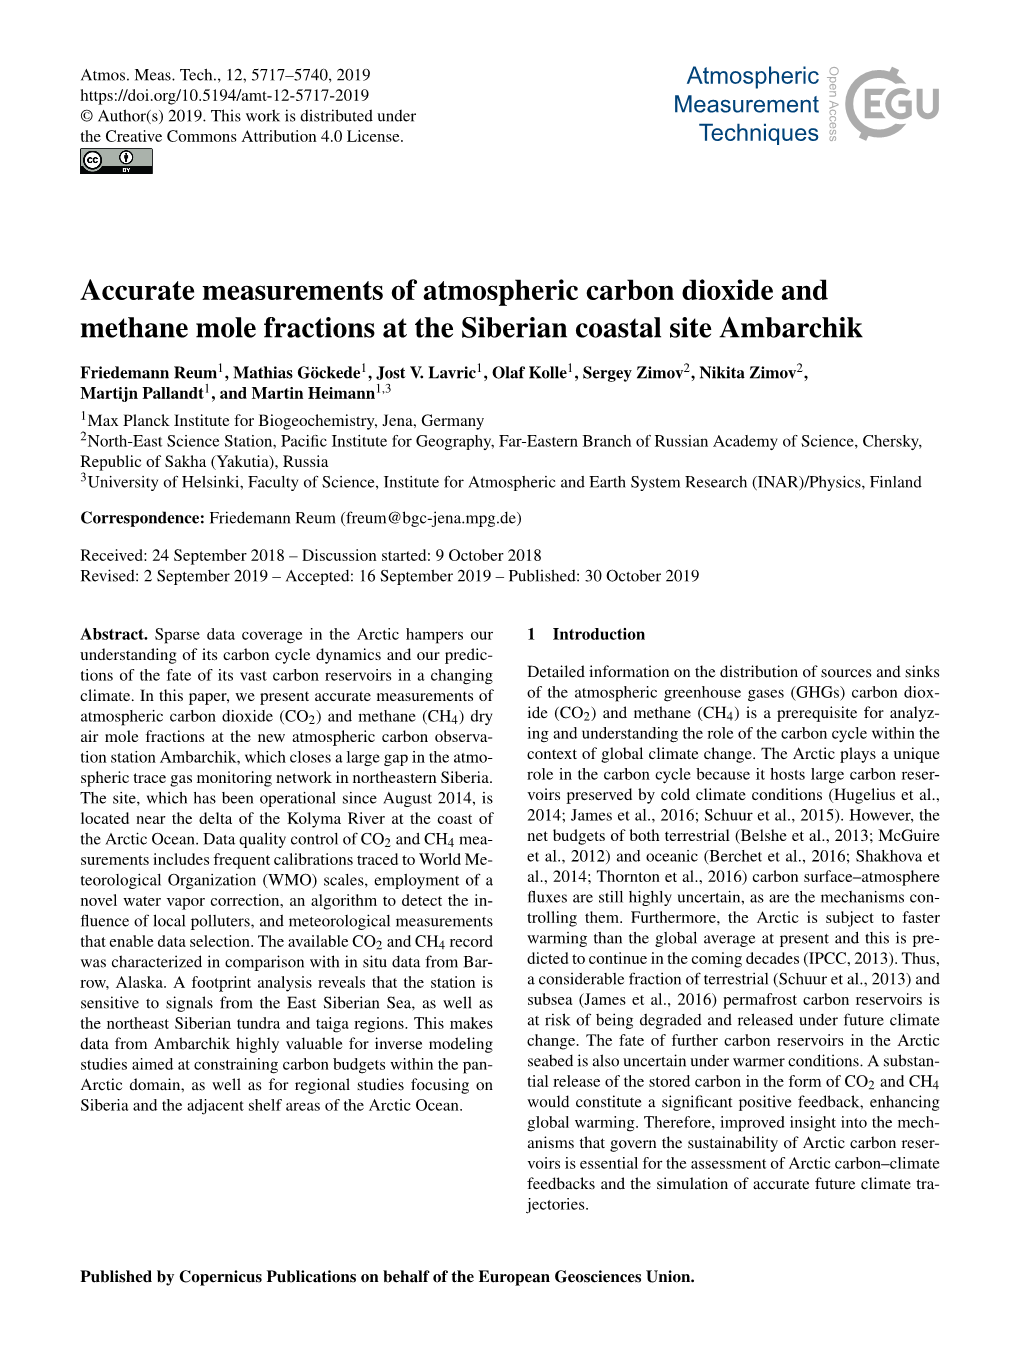 Accurate Measurements of Atmospheric Carbon Dioxide and Methane Mole Fractions at the Siberian Coastal Site Ambarchik